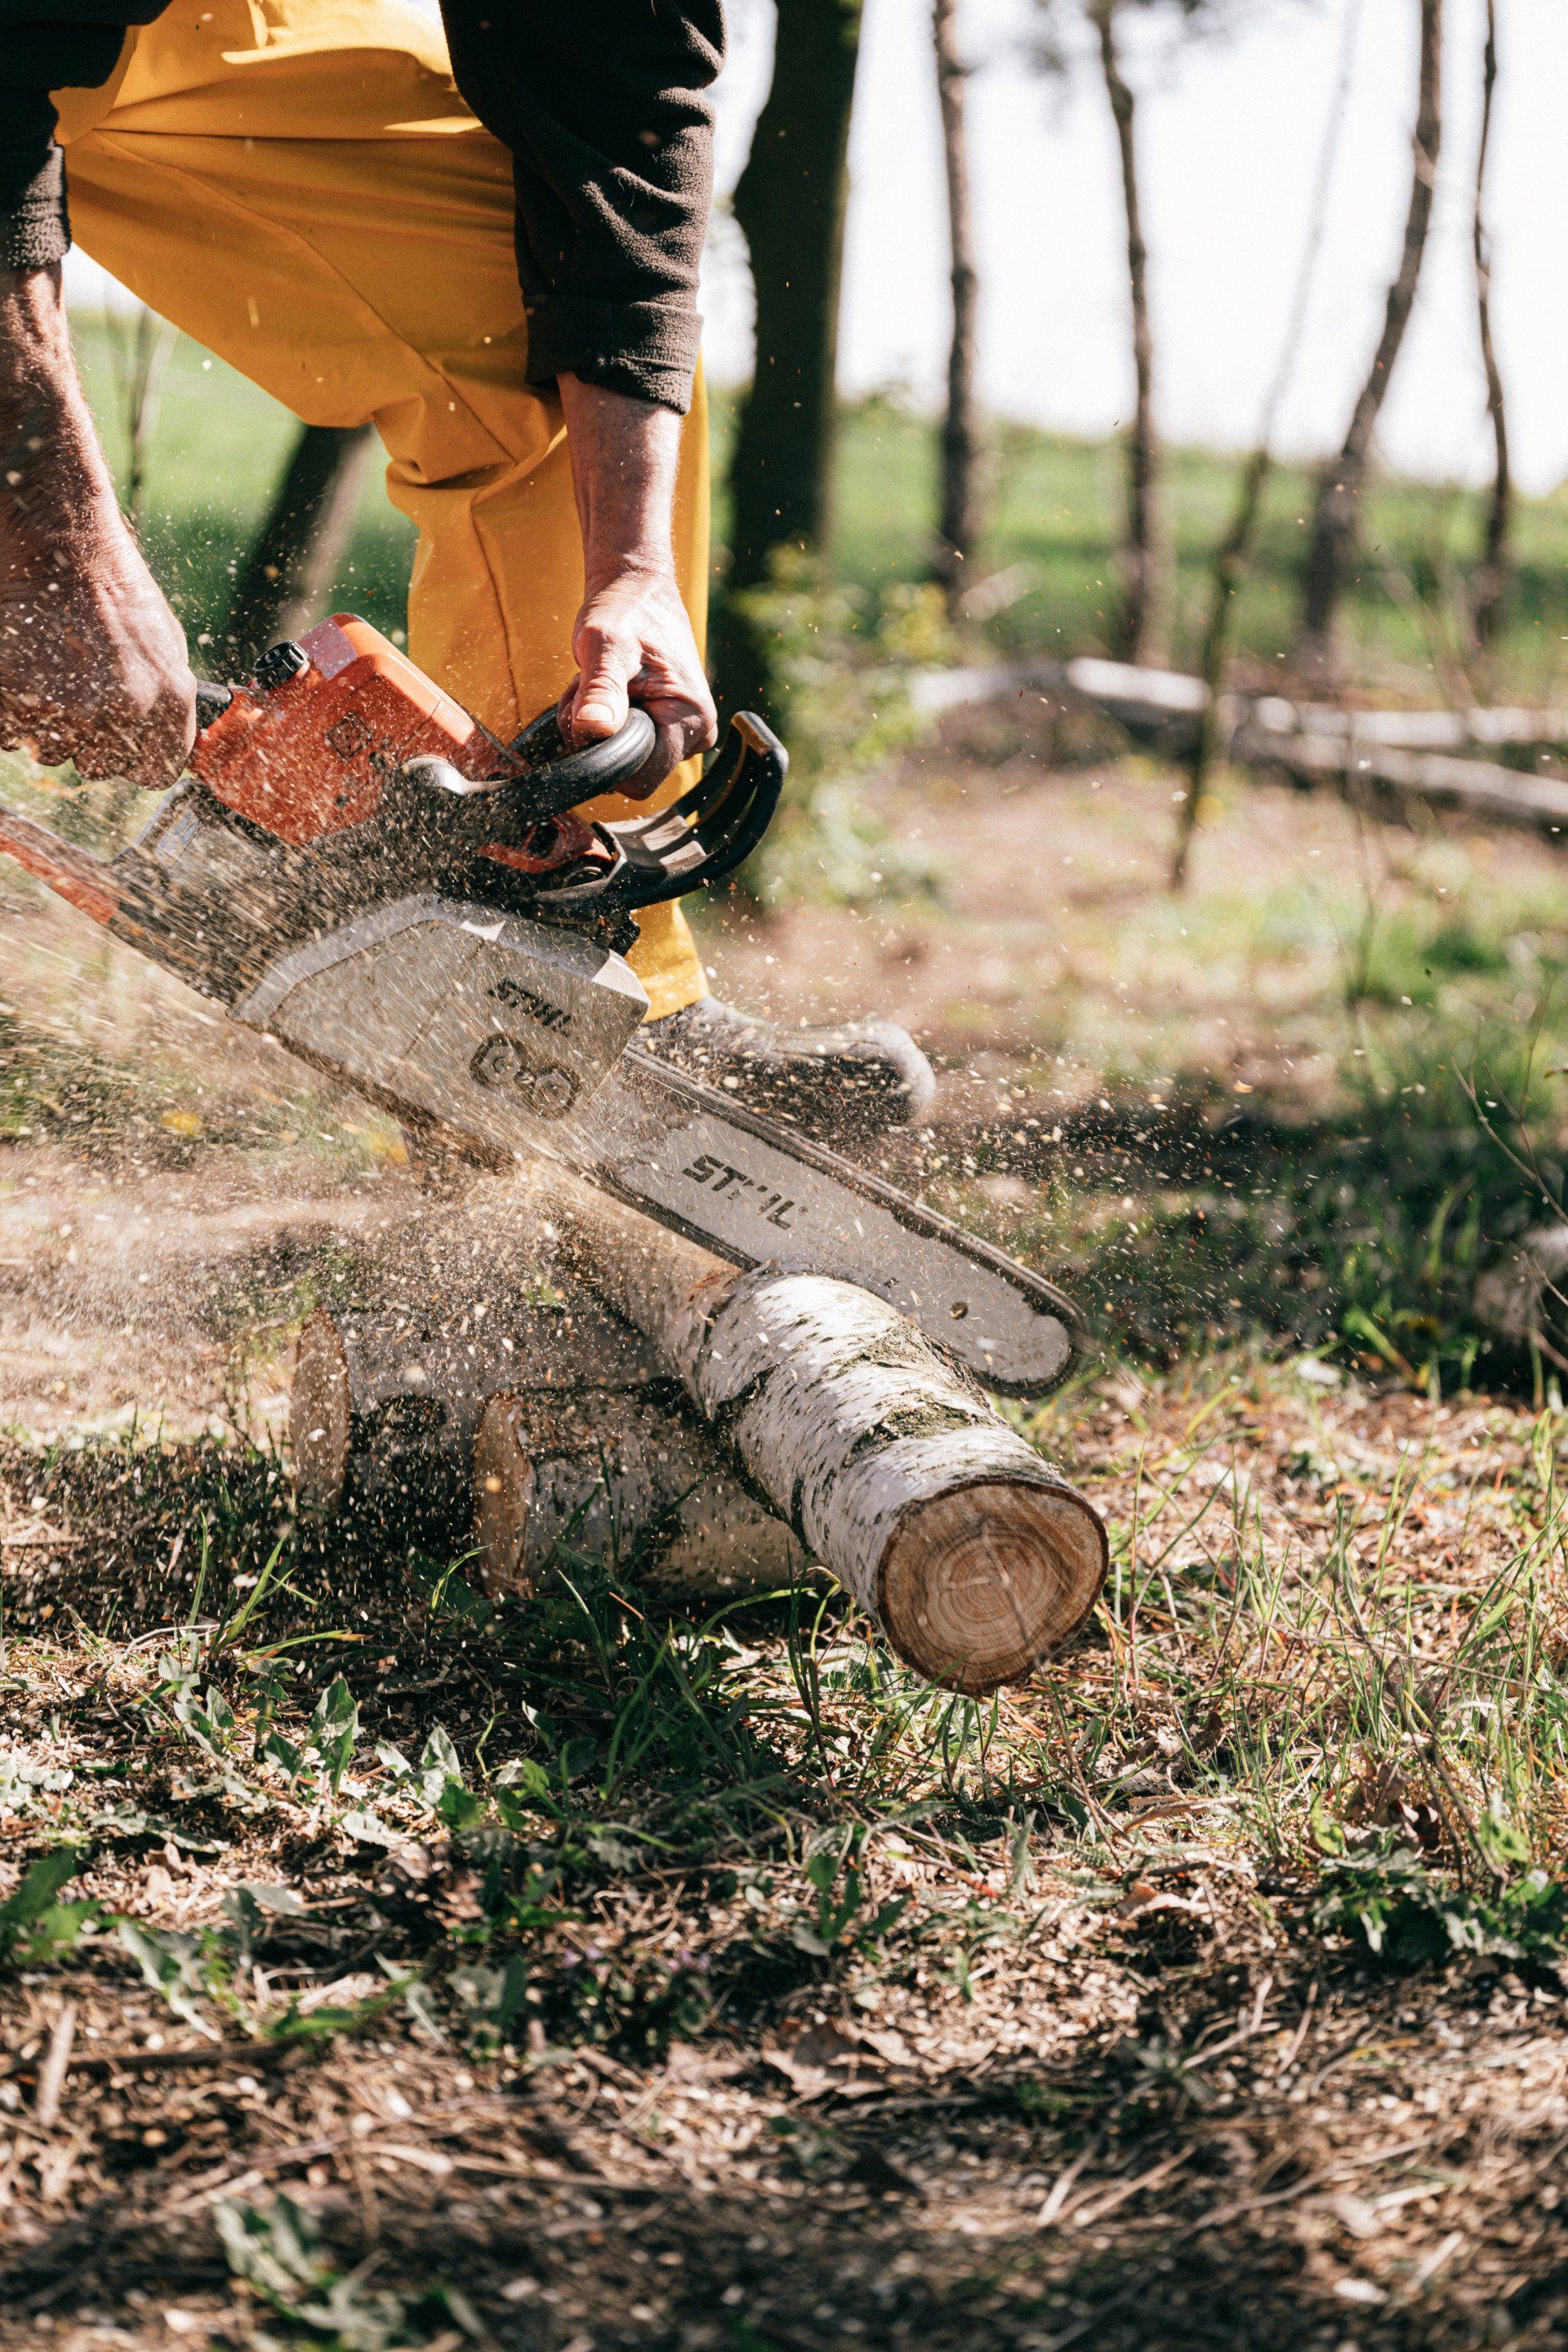 A chain saw cutting into a tree branch, sawdust flying.